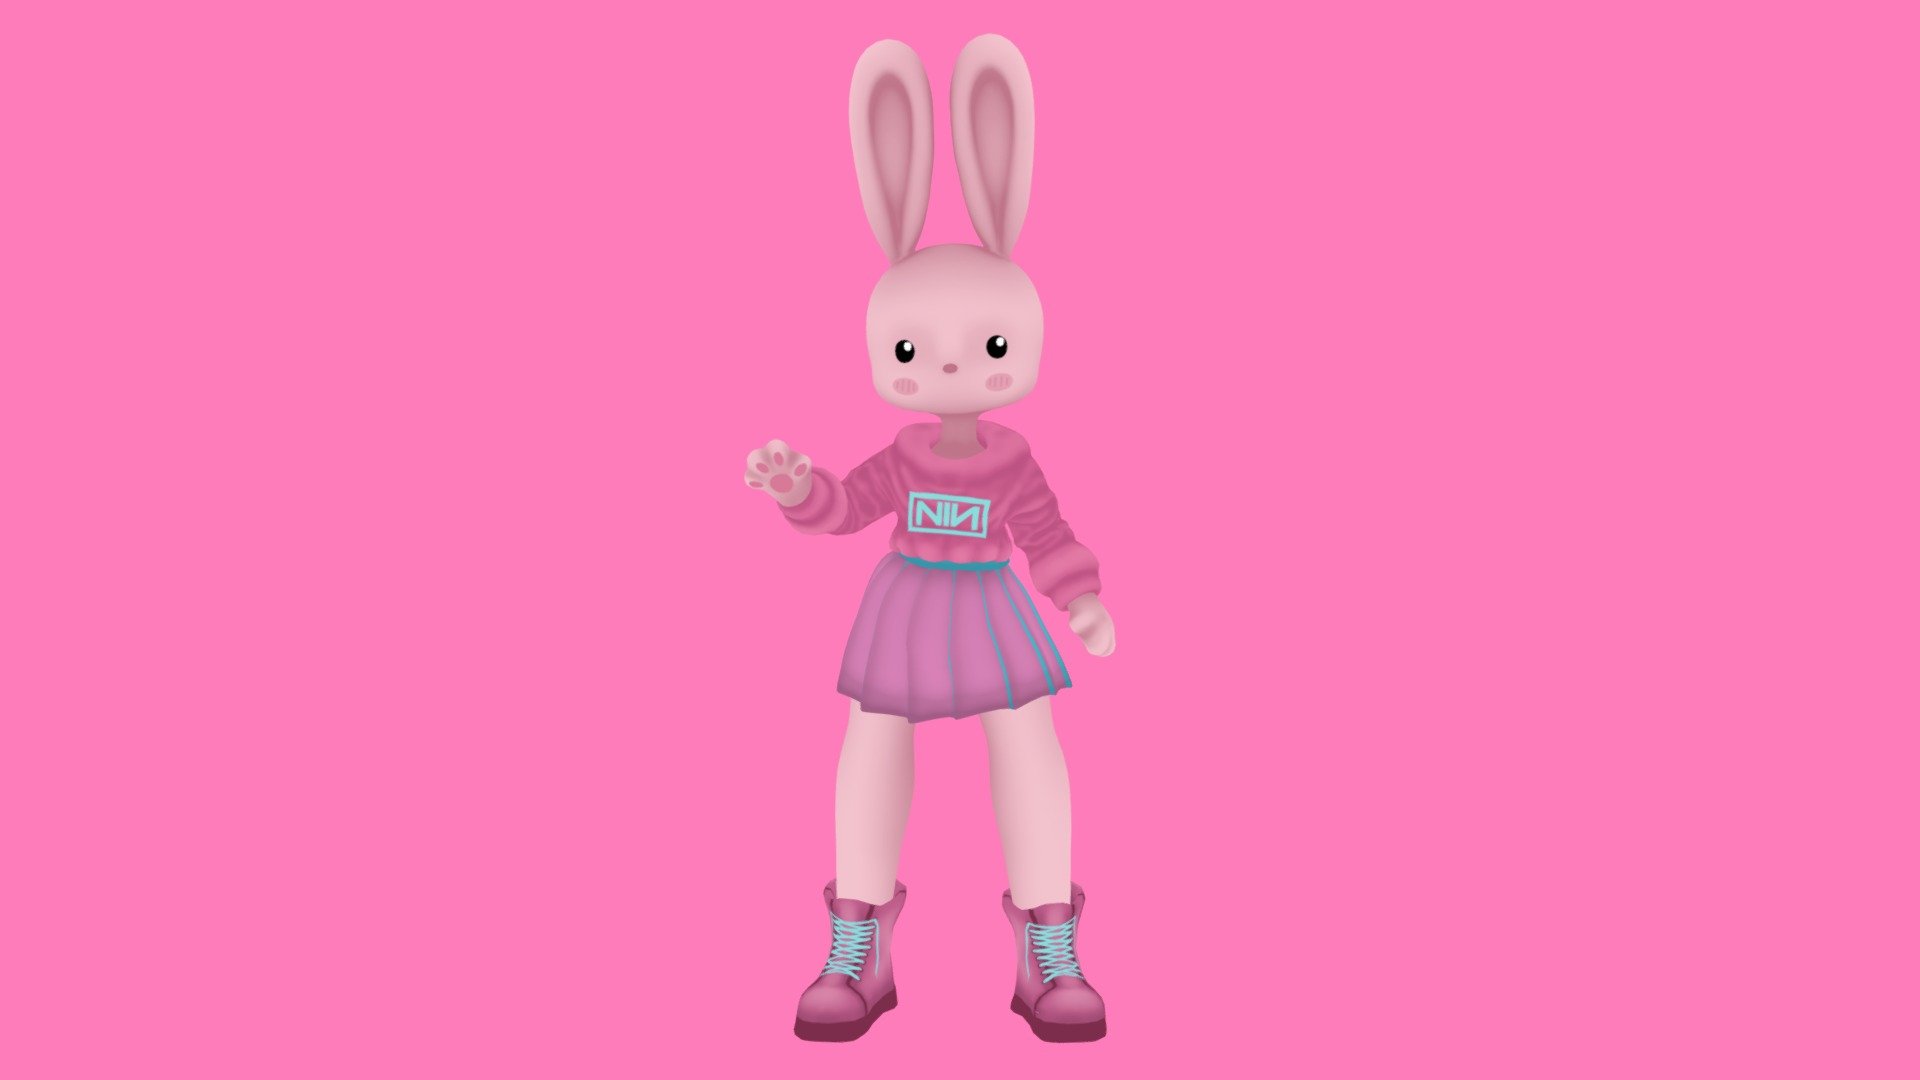 She's waving :) I made this in Zbrush, Substance Painter and Blender. The rig is terrible but it works well enough for the bunny to wave 3d model